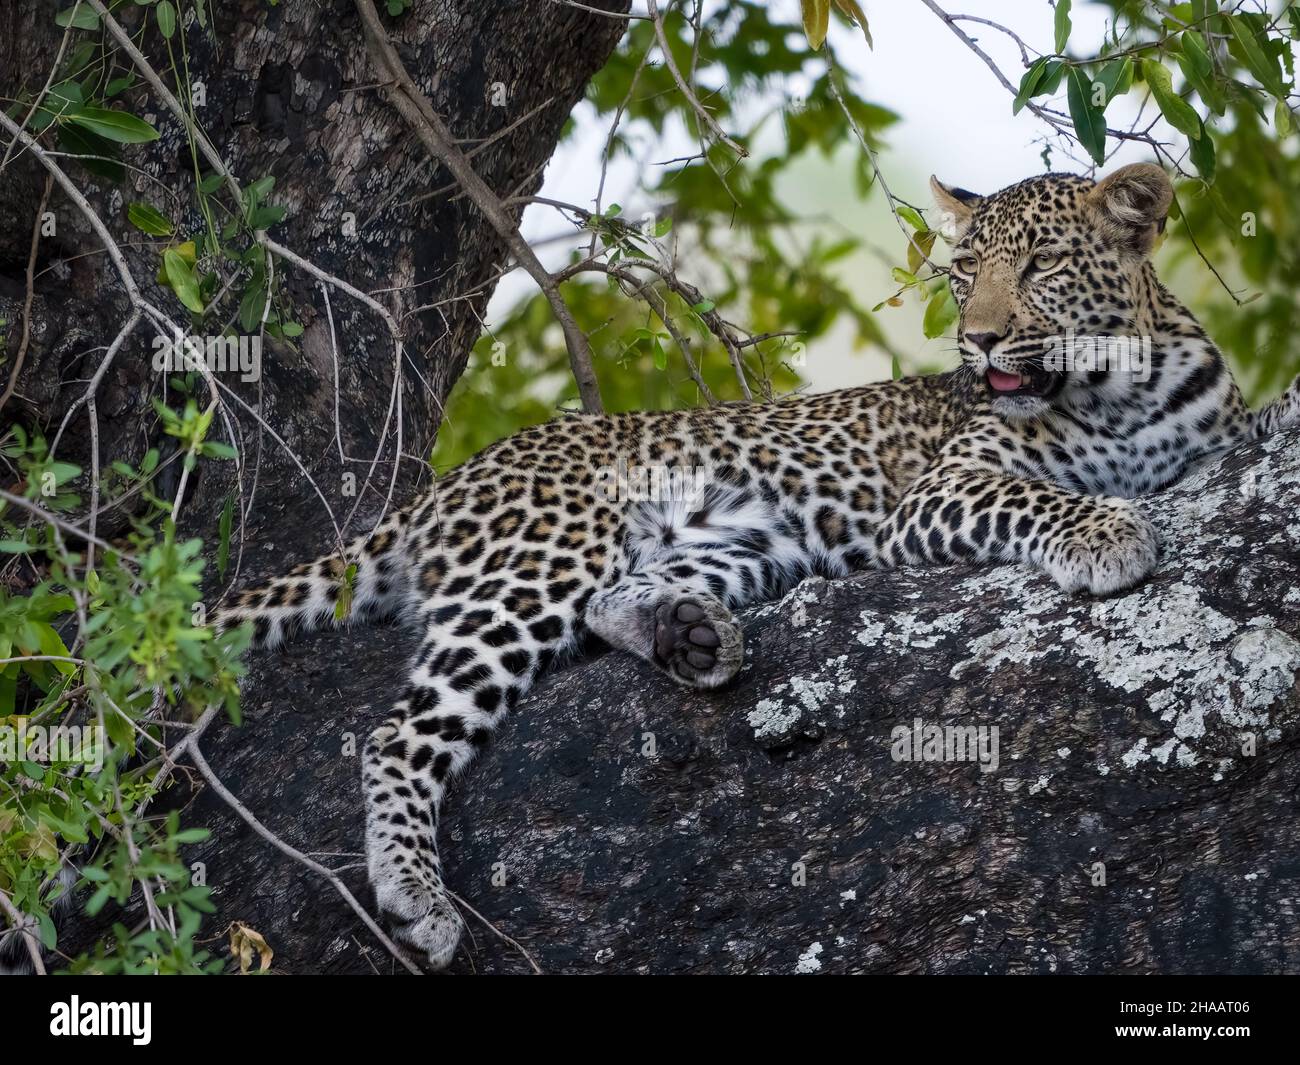 Leopard (Panthera Pardus) female in a African ebony or jackal-berry (Diospyros mespiliformis) tree. South Africa. Stock Photo